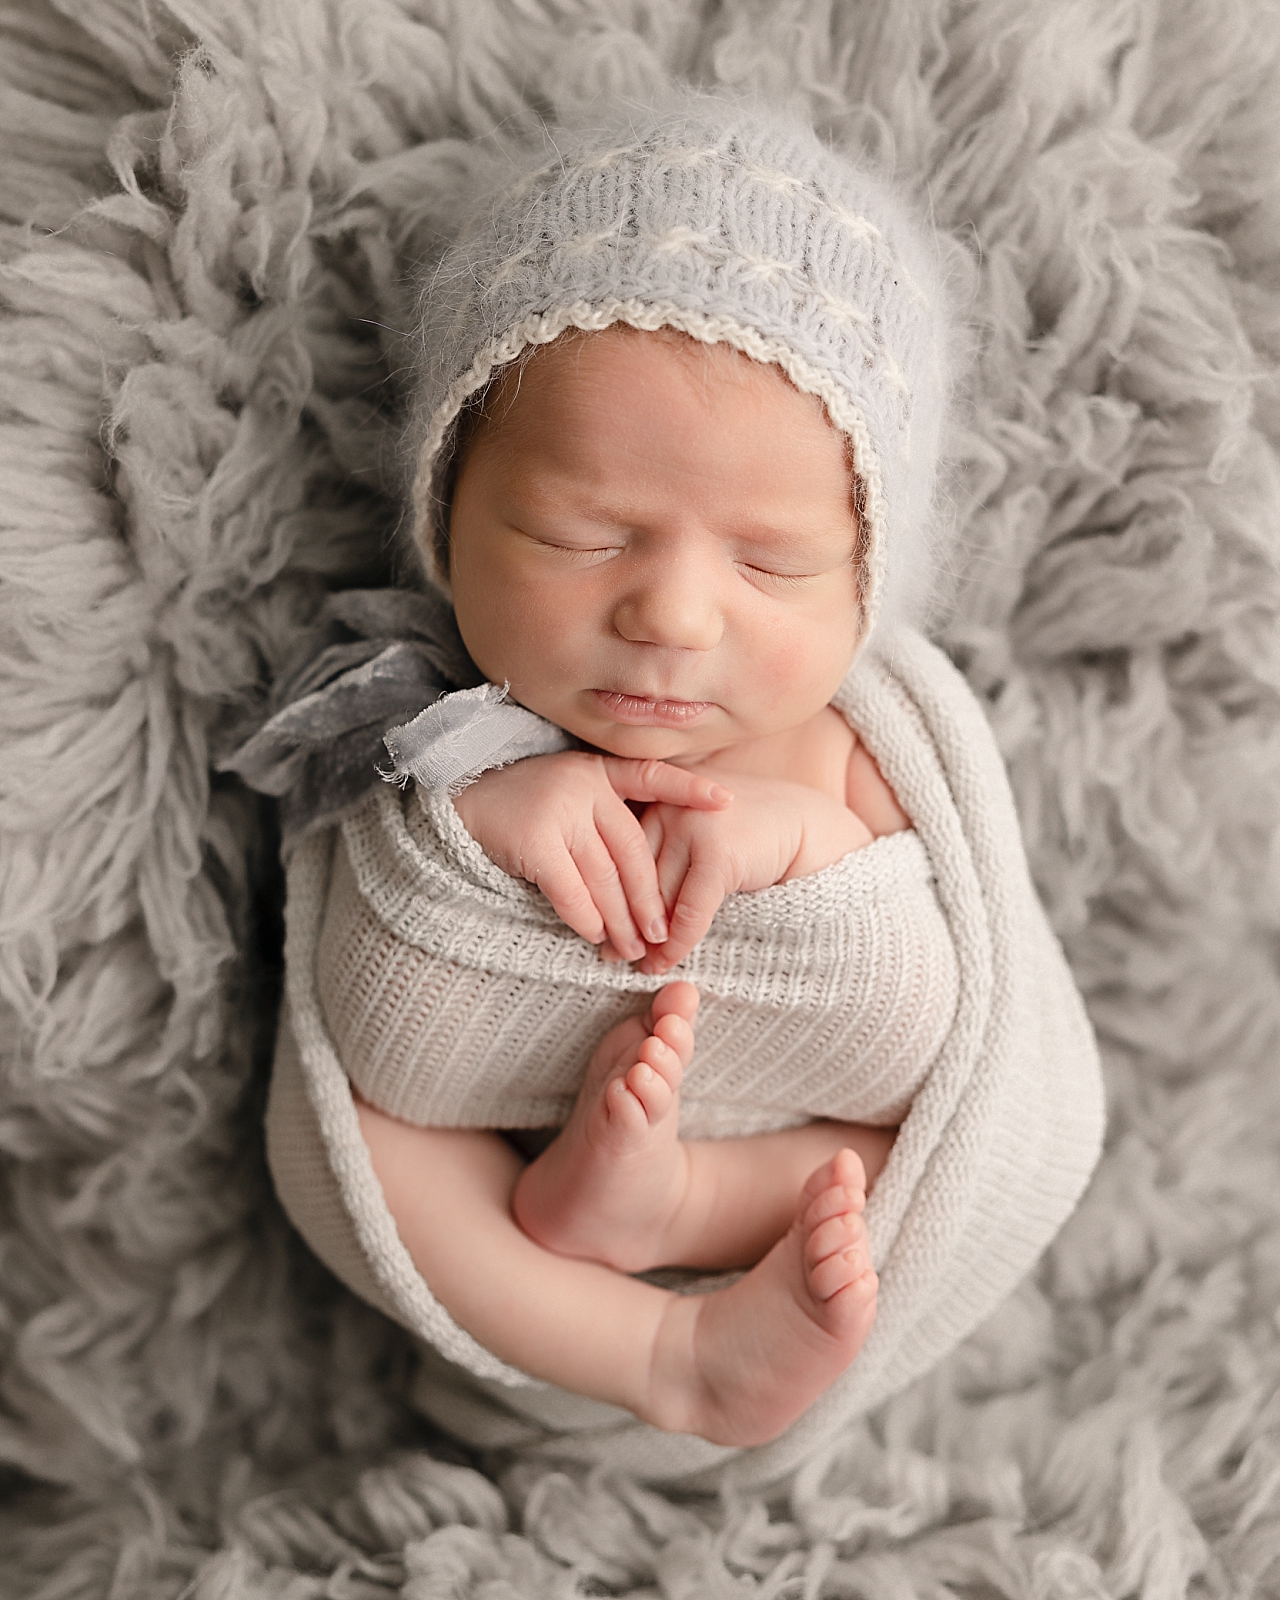 baby wrapped in a neutral wrap and hat on a carpet Tidee Didee Portland